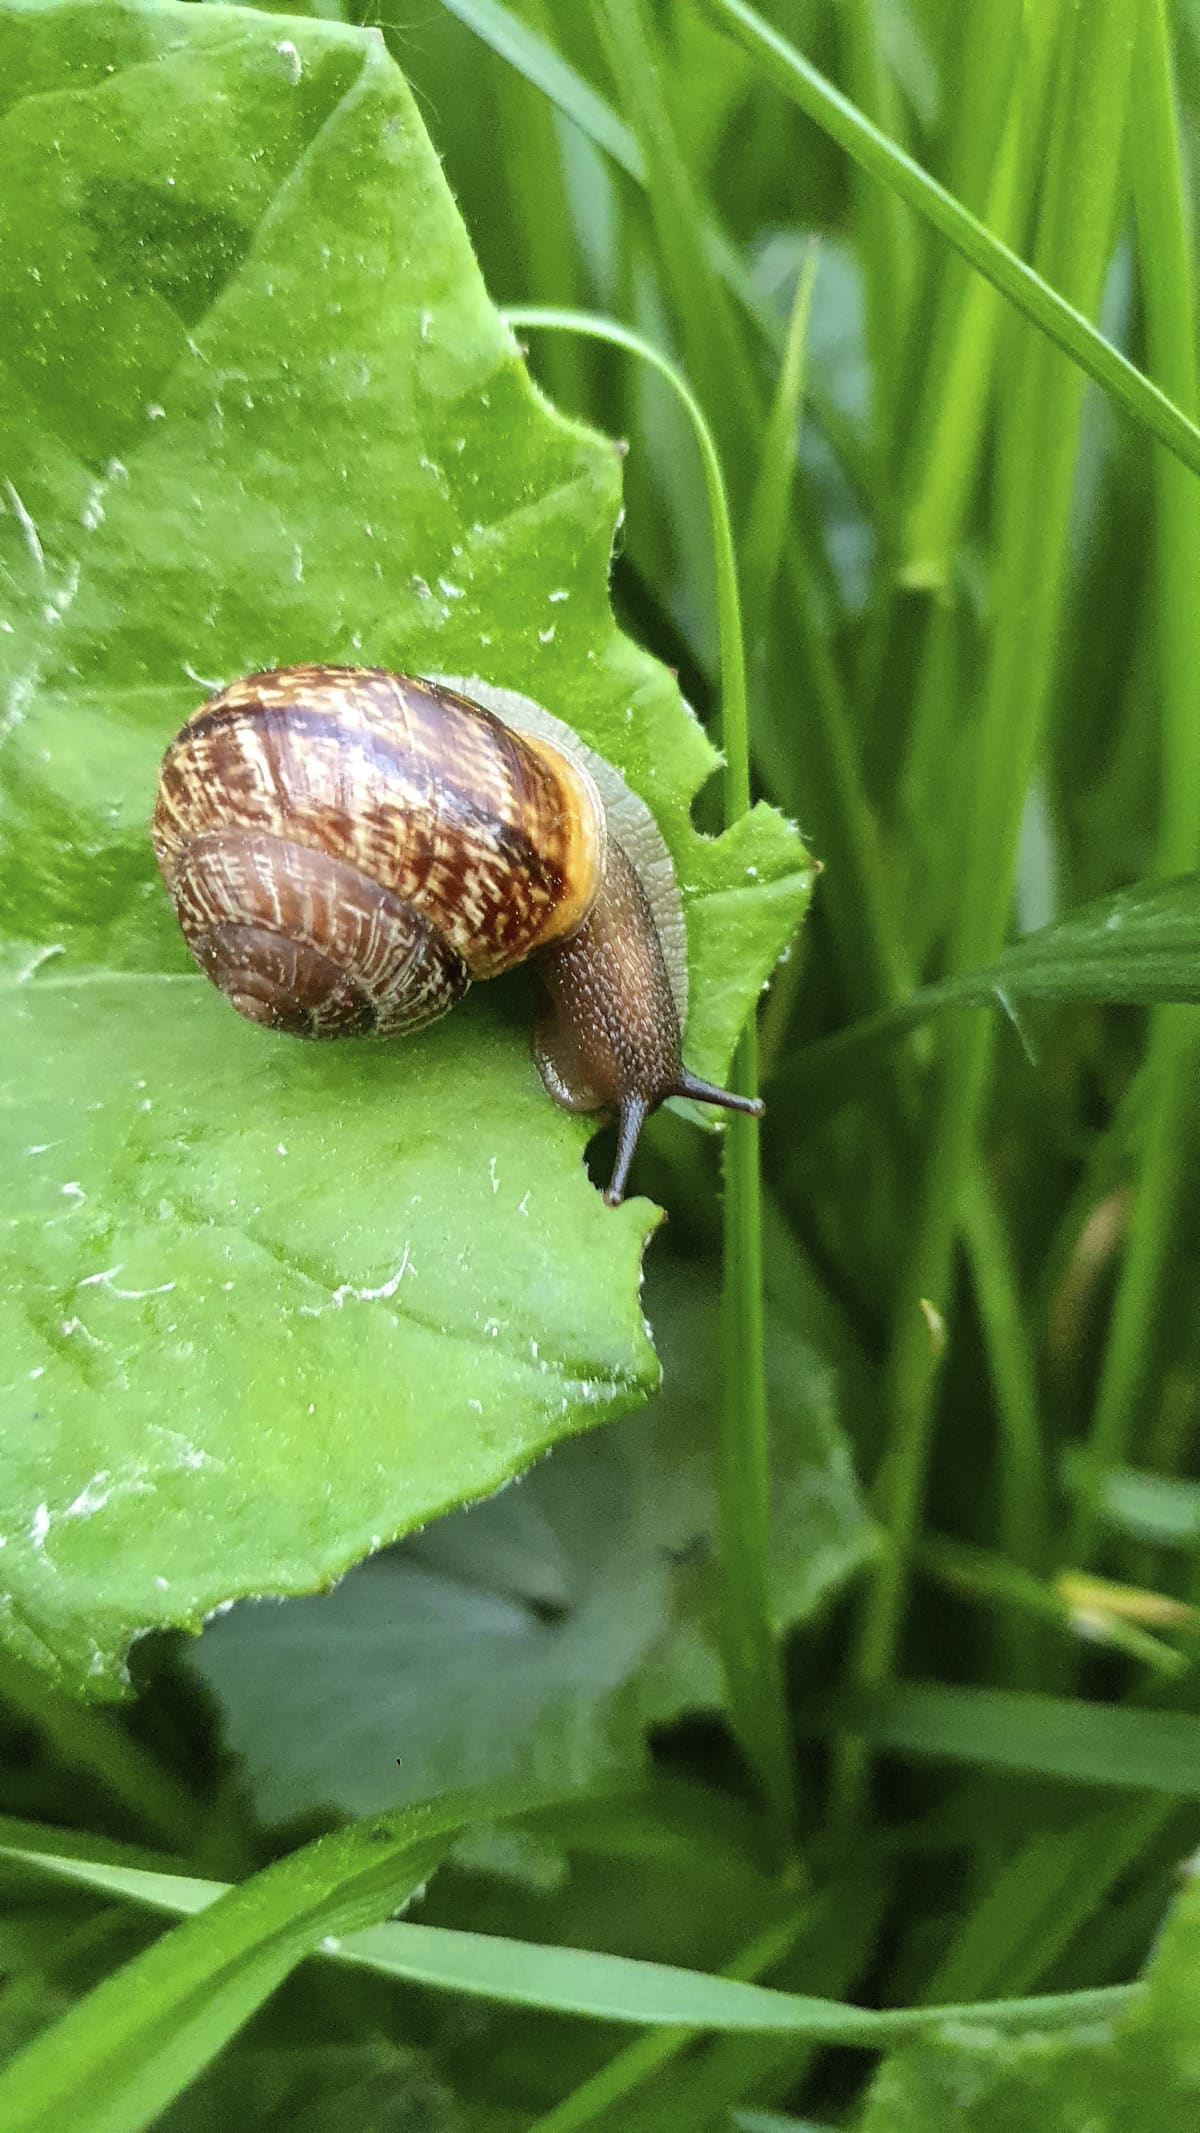 Close-up of a brown snail on the leaf